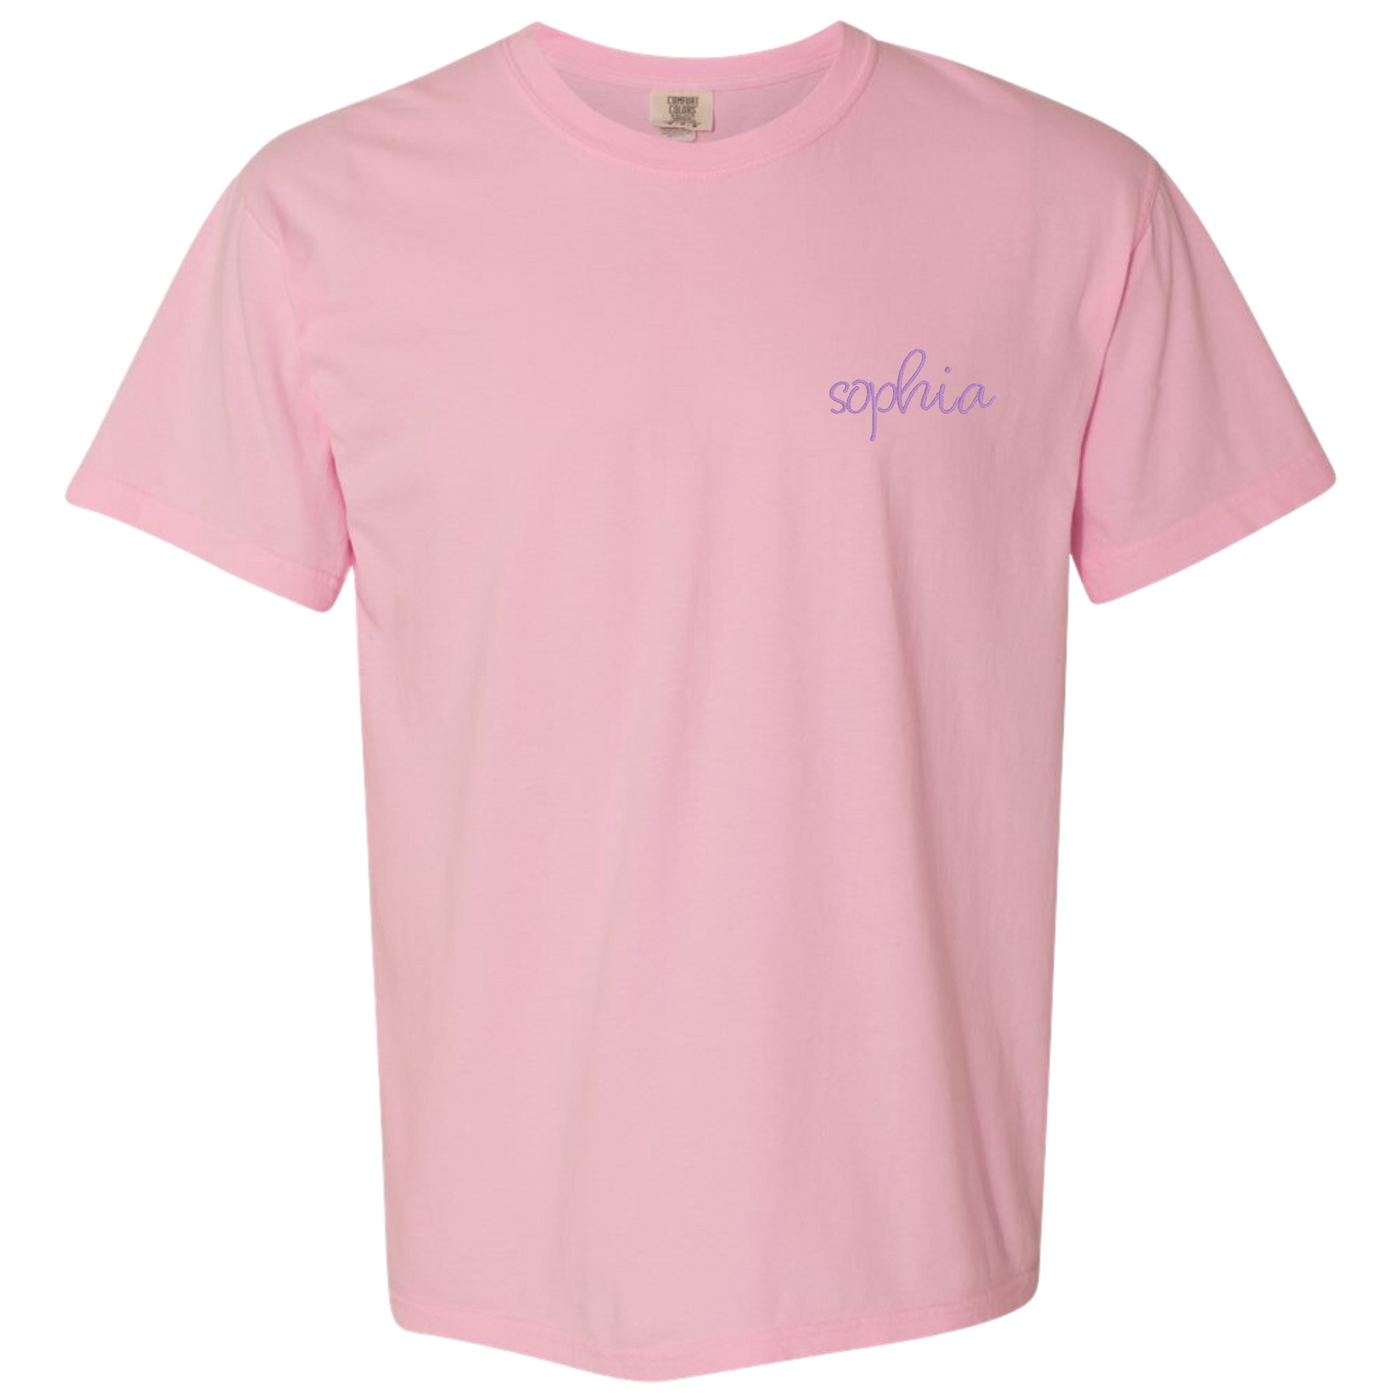 Personalized Embroidered T-shirt - Barn Street Designs